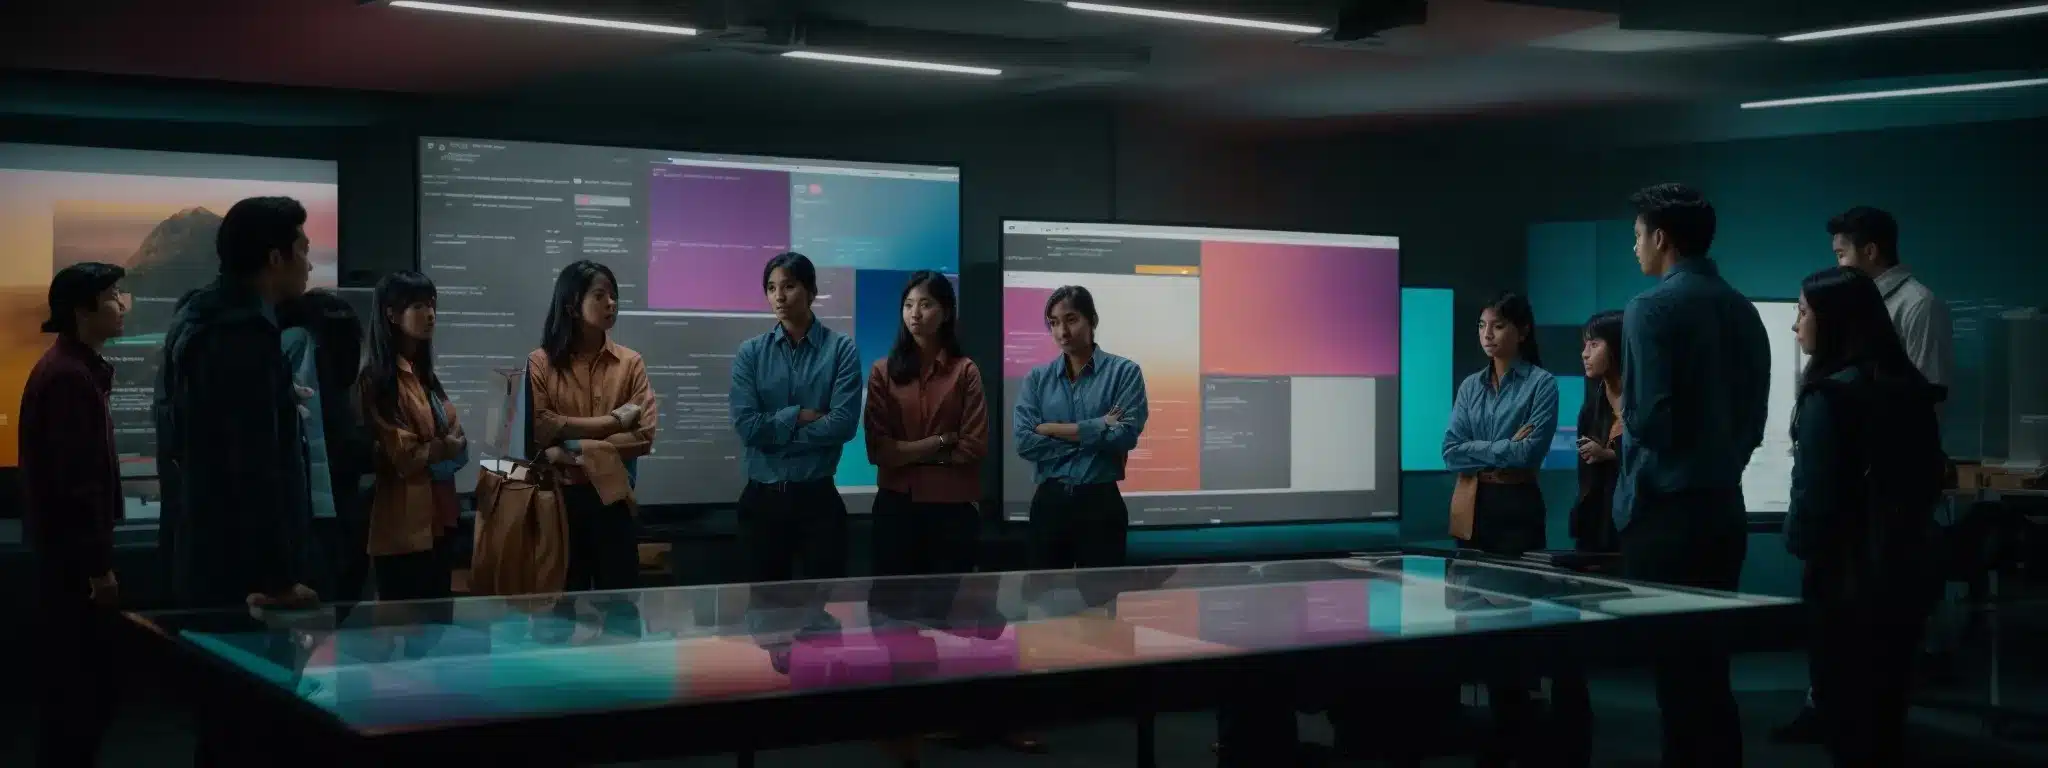 A Team Stands Around A Glass Table, Intently Focused On A Large Screen Projecting A Colorful Website Interface, Signifying The Final Stages Of A Collaborative Project Launch.